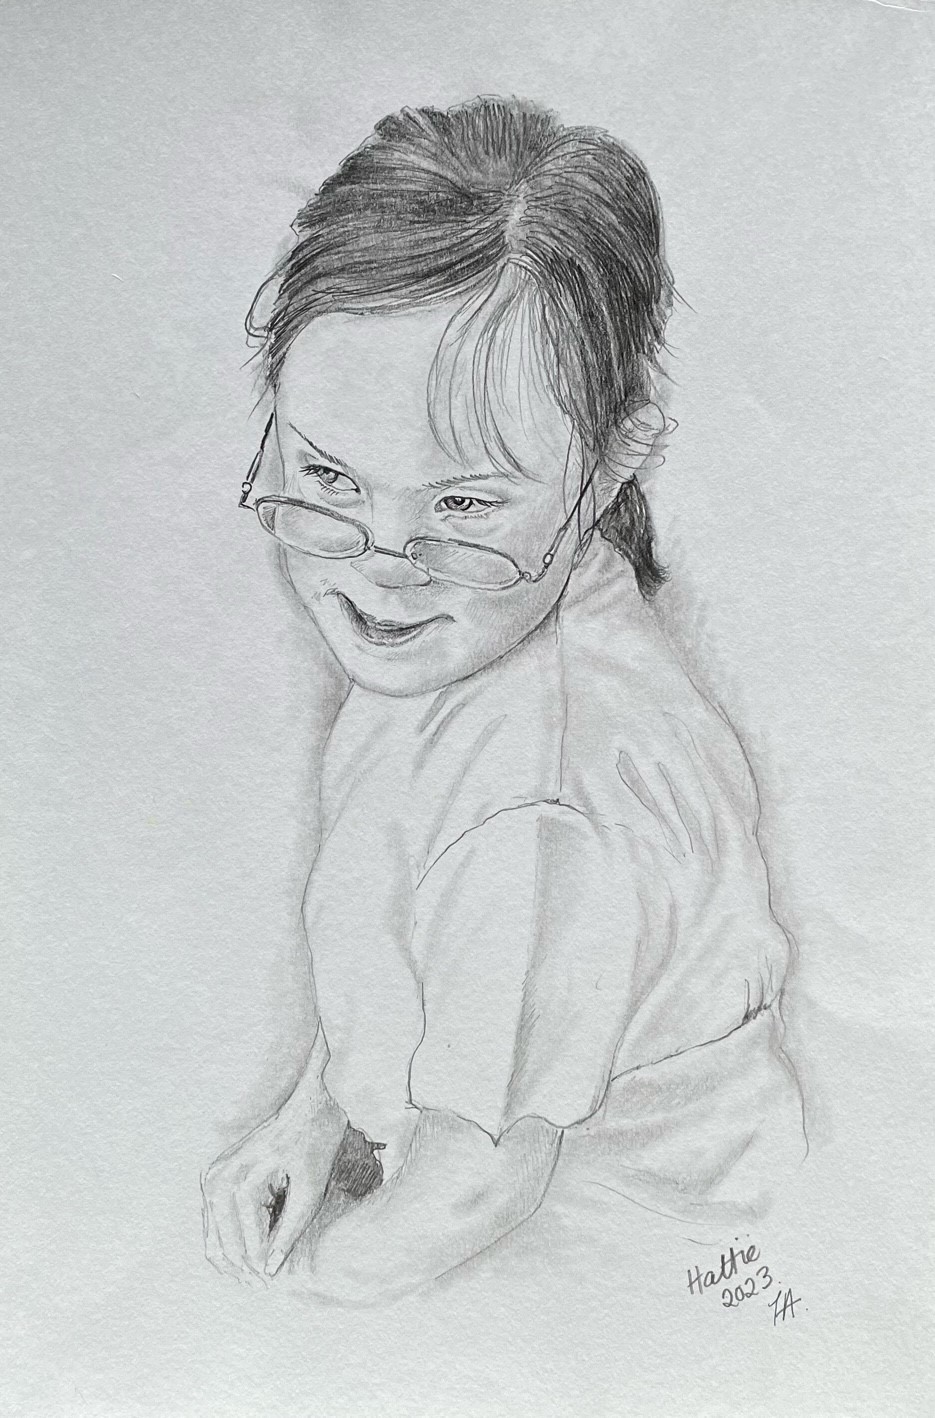 A pencil sketch of a young girl wearing glasses and a tshirt. Her hair is in a ponytail.